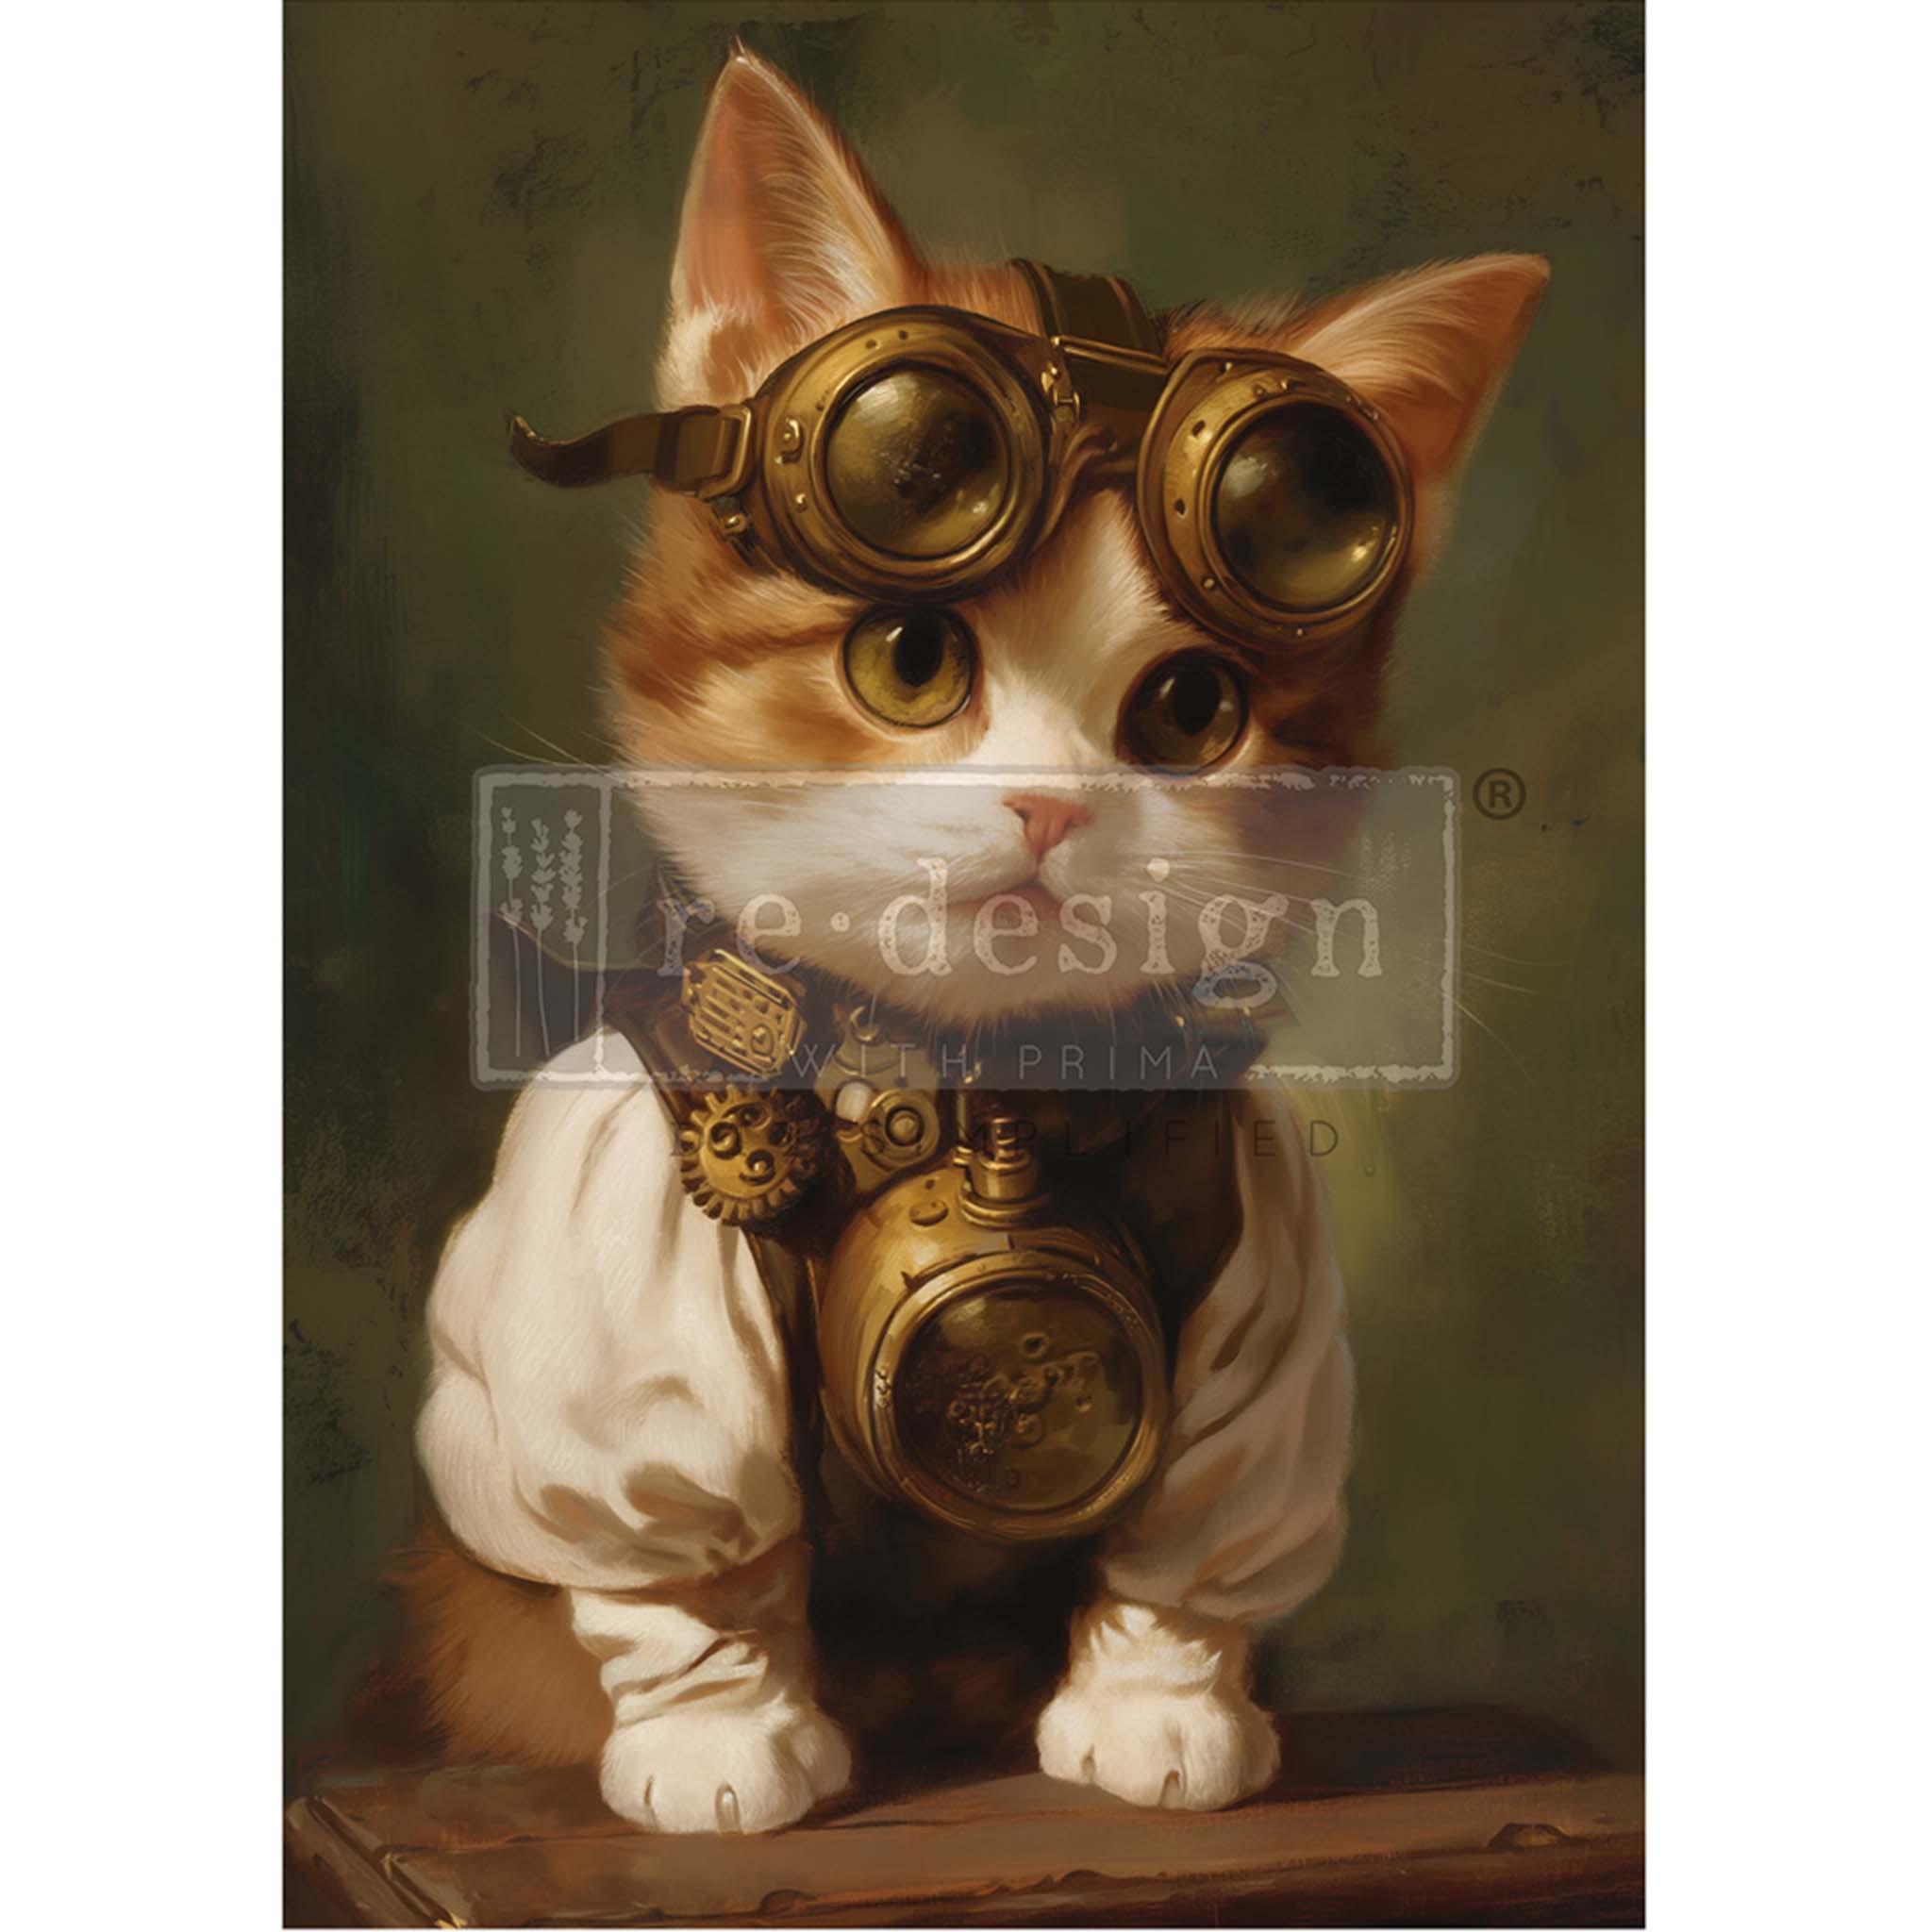 A1 fiber paper featuring a steampunk-inspired design of an adorable orange and white kitten sporting pilot's goggles and clothing. White borders are on the sides.